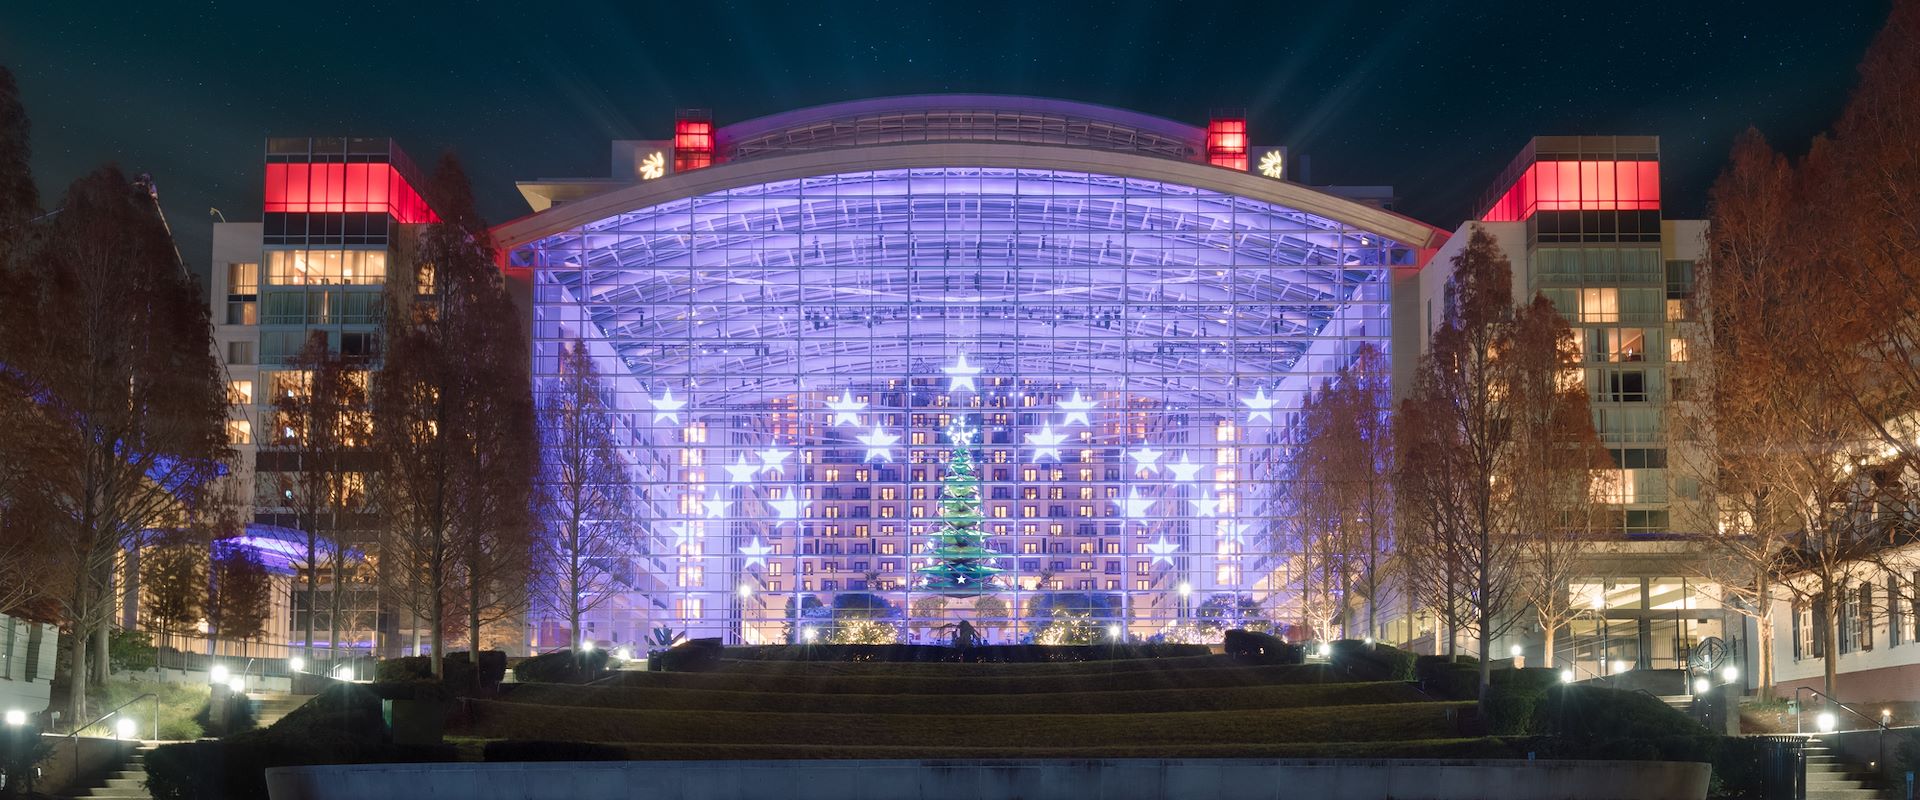 Winterfest at Gaylord National Resort